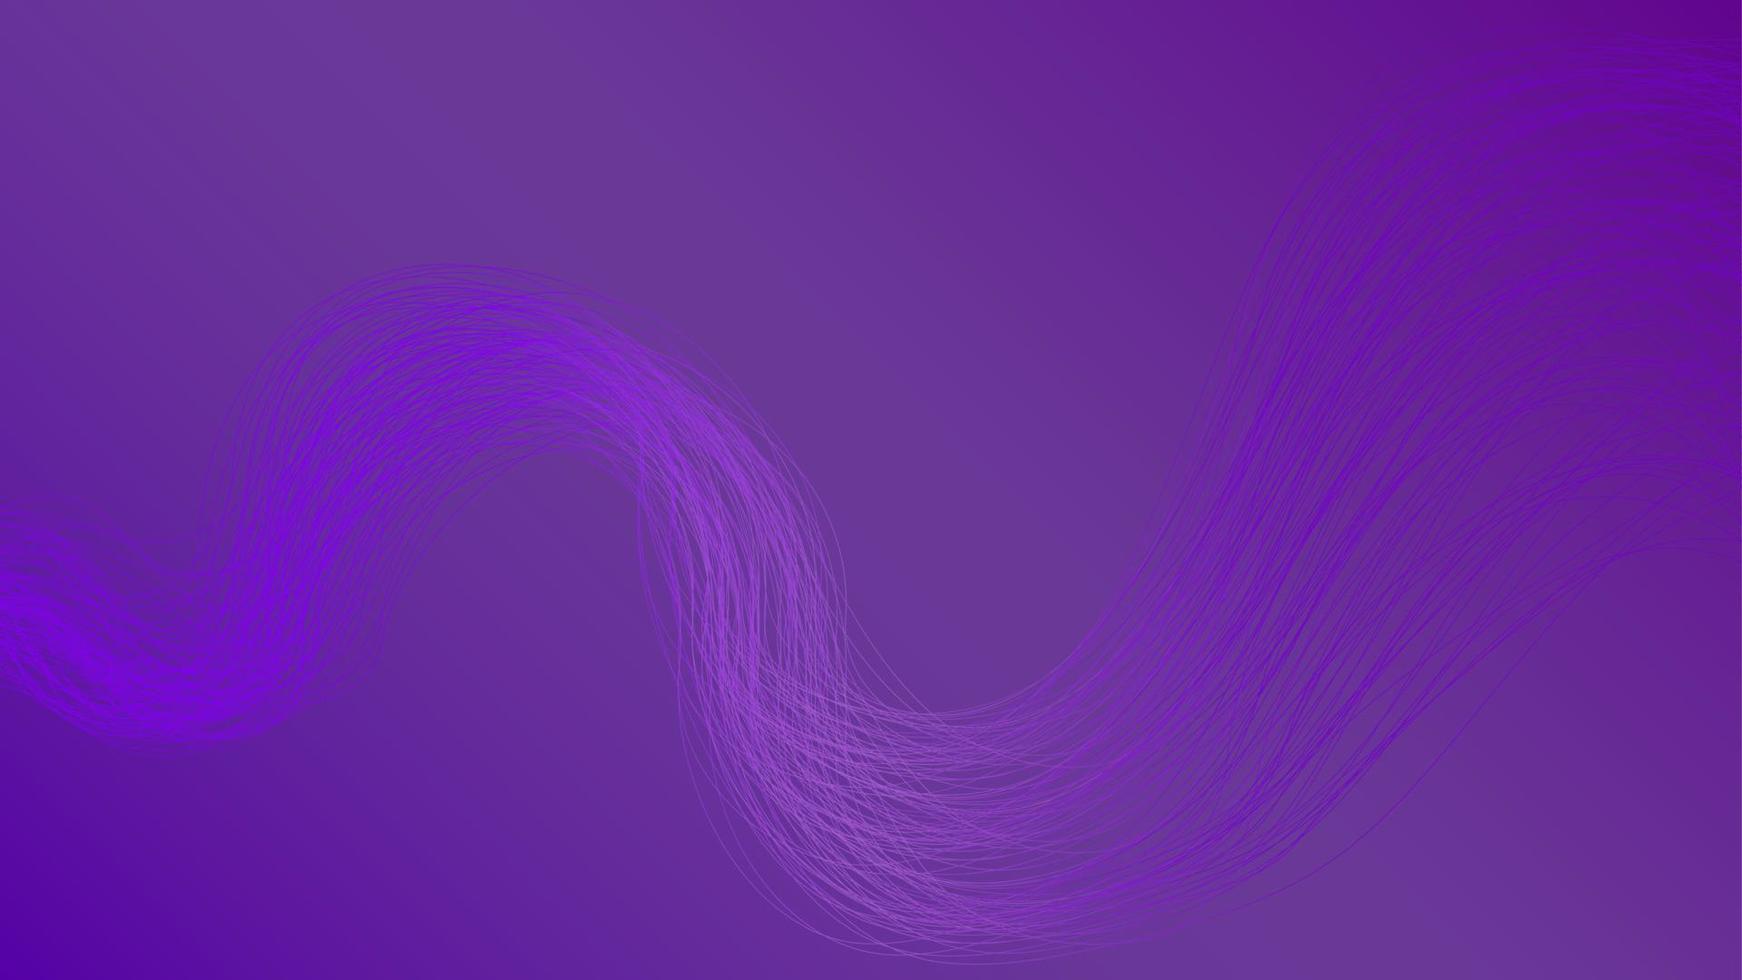 Vector smooth waves on dark purple background. Futuristic technology design backdrop with purple gradient transition.